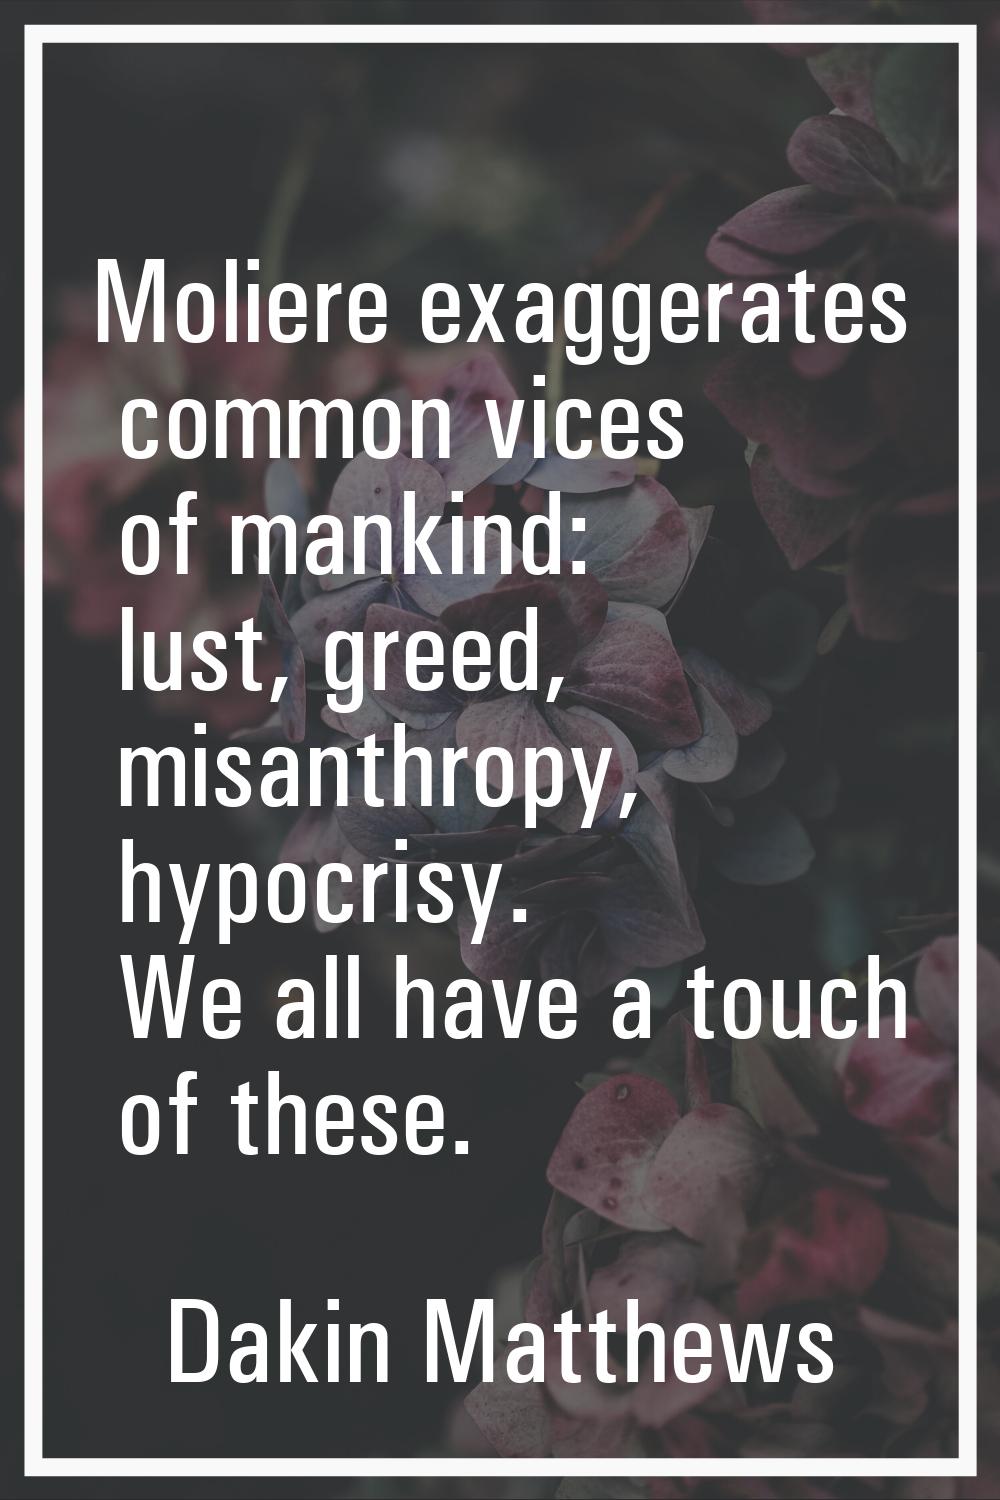 Moliere exaggerates common vices of mankind: lust, greed, misanthropy, hypocrisy. We all have a tou